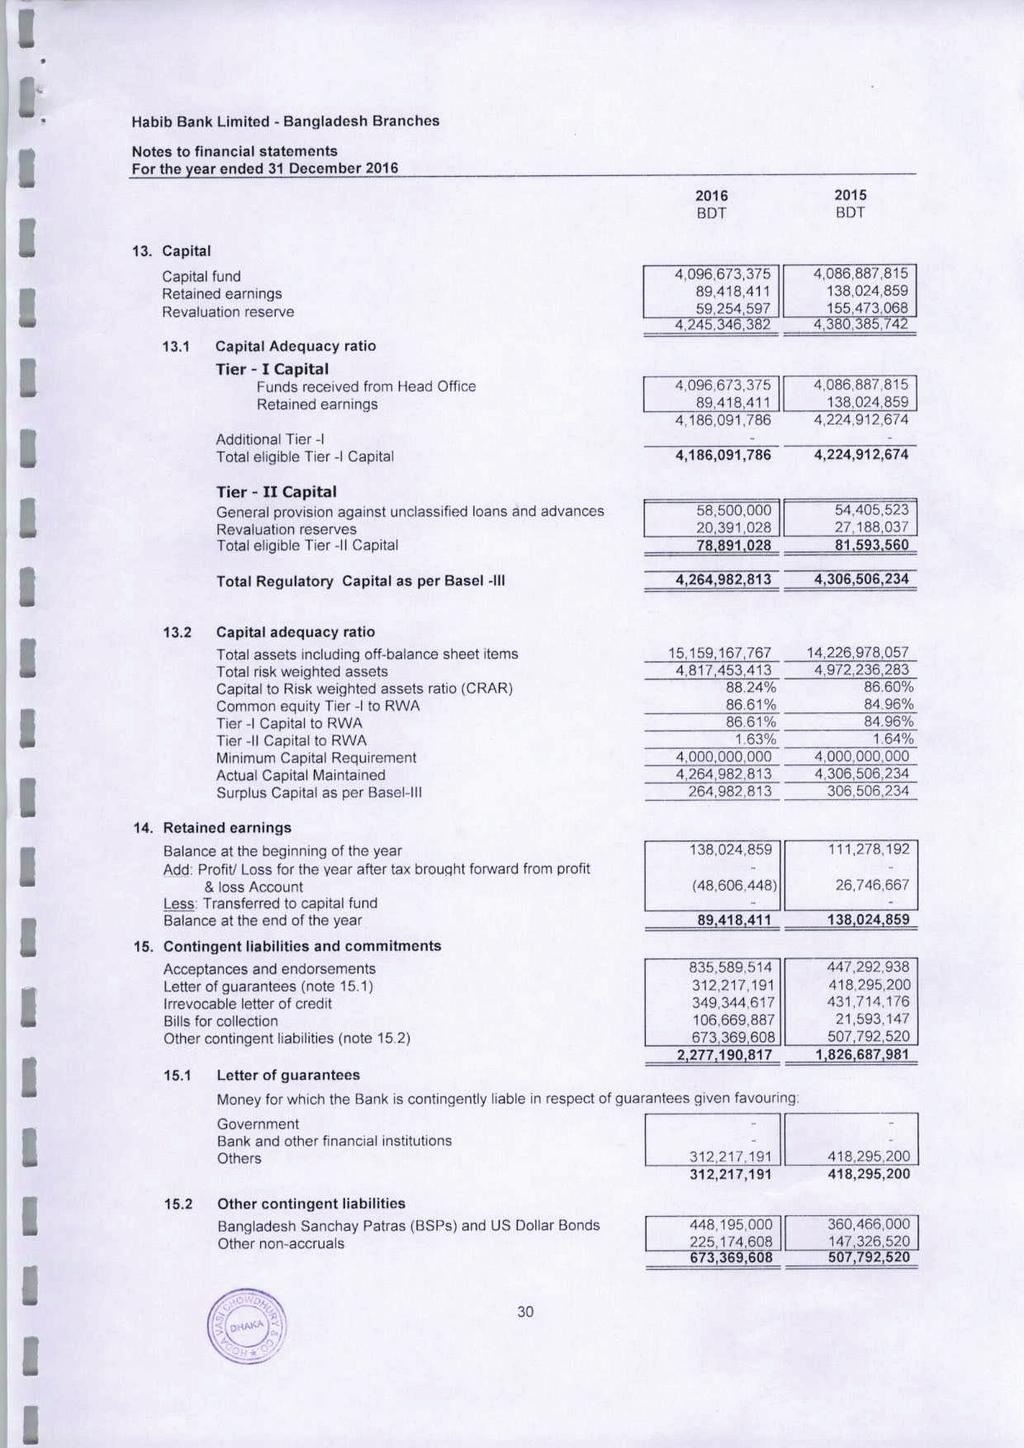 Habib Bank Limited - Bangladesh Branches Notes to financial statements Forthe year ended 31 December 2016 2016 Capital fund Retained earnings Revaluation reserve 13.